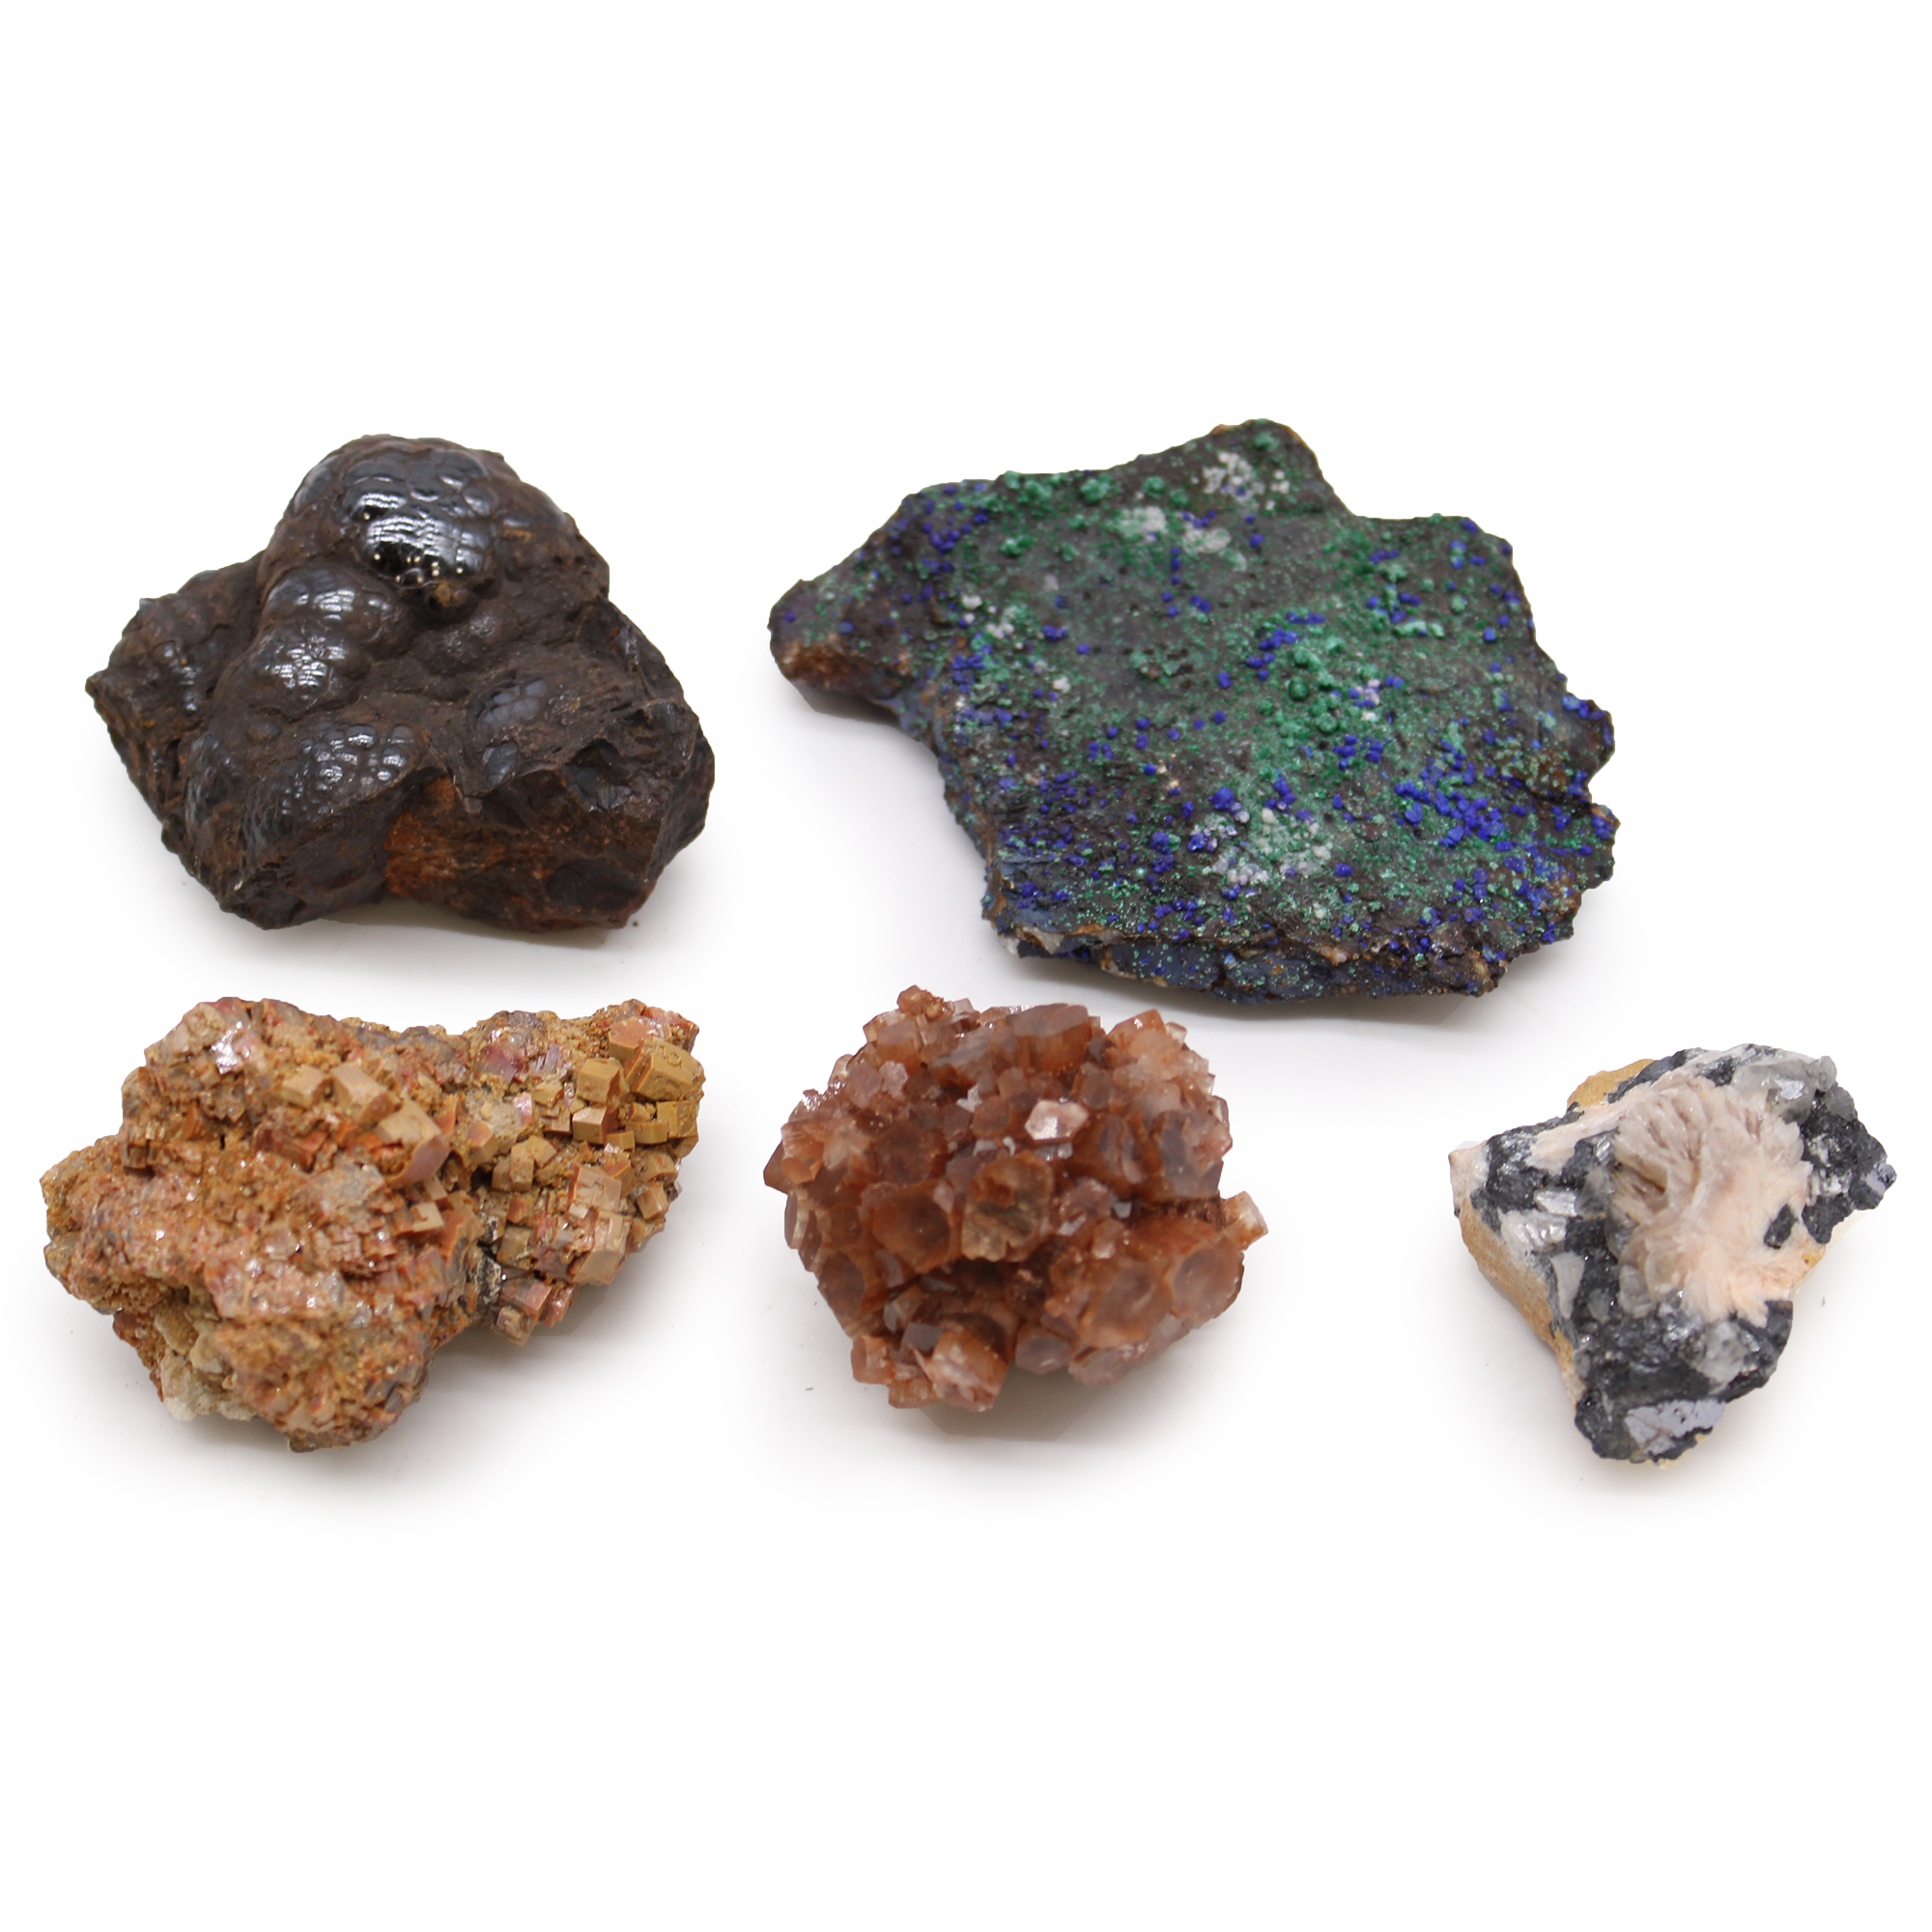 Rare Mineral Specimens - Pack of 5 - Mix 3